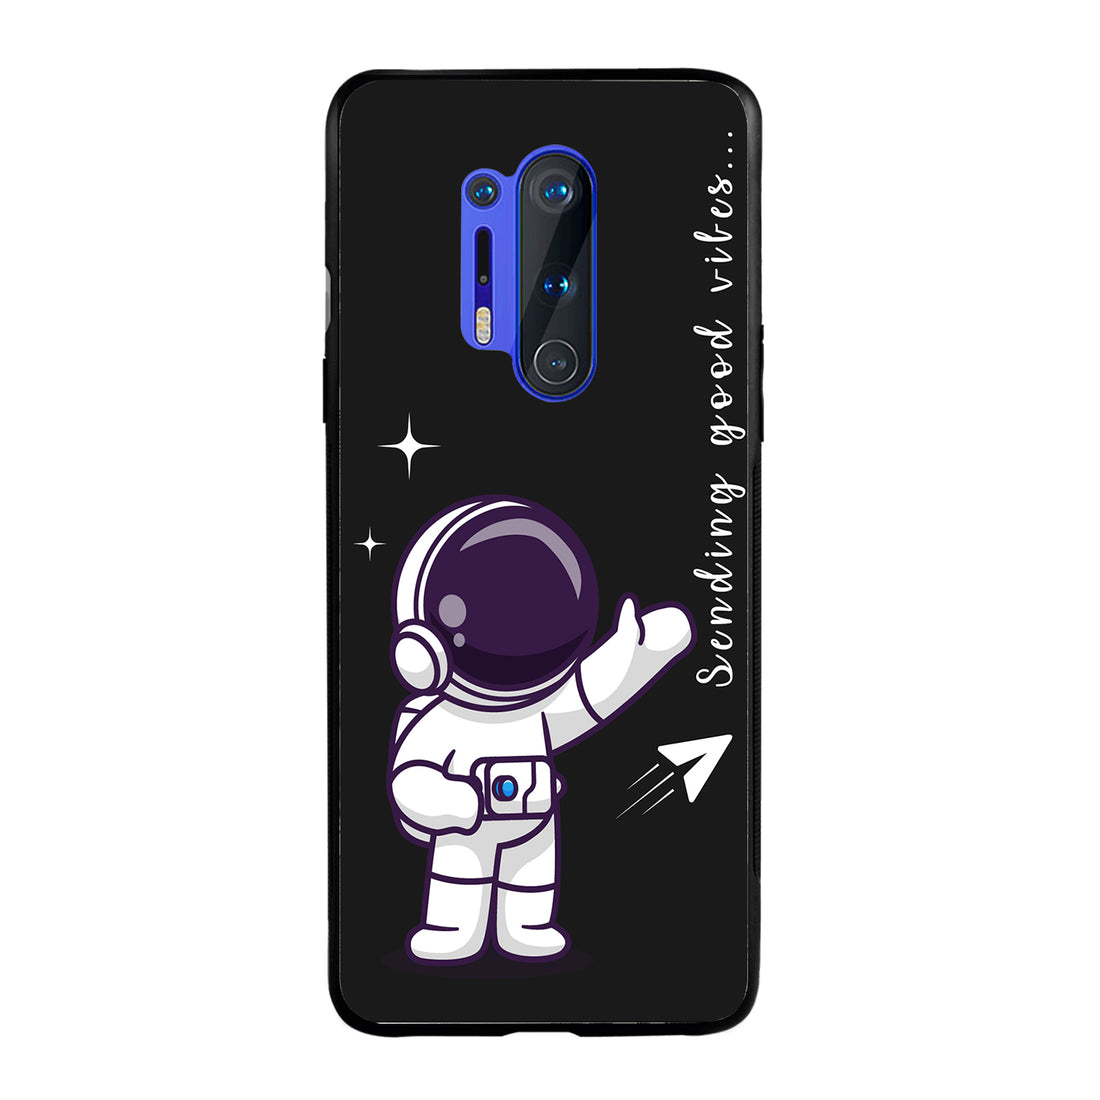 Spending Good Vibes Bff Oneplus 8 Pro Back Case